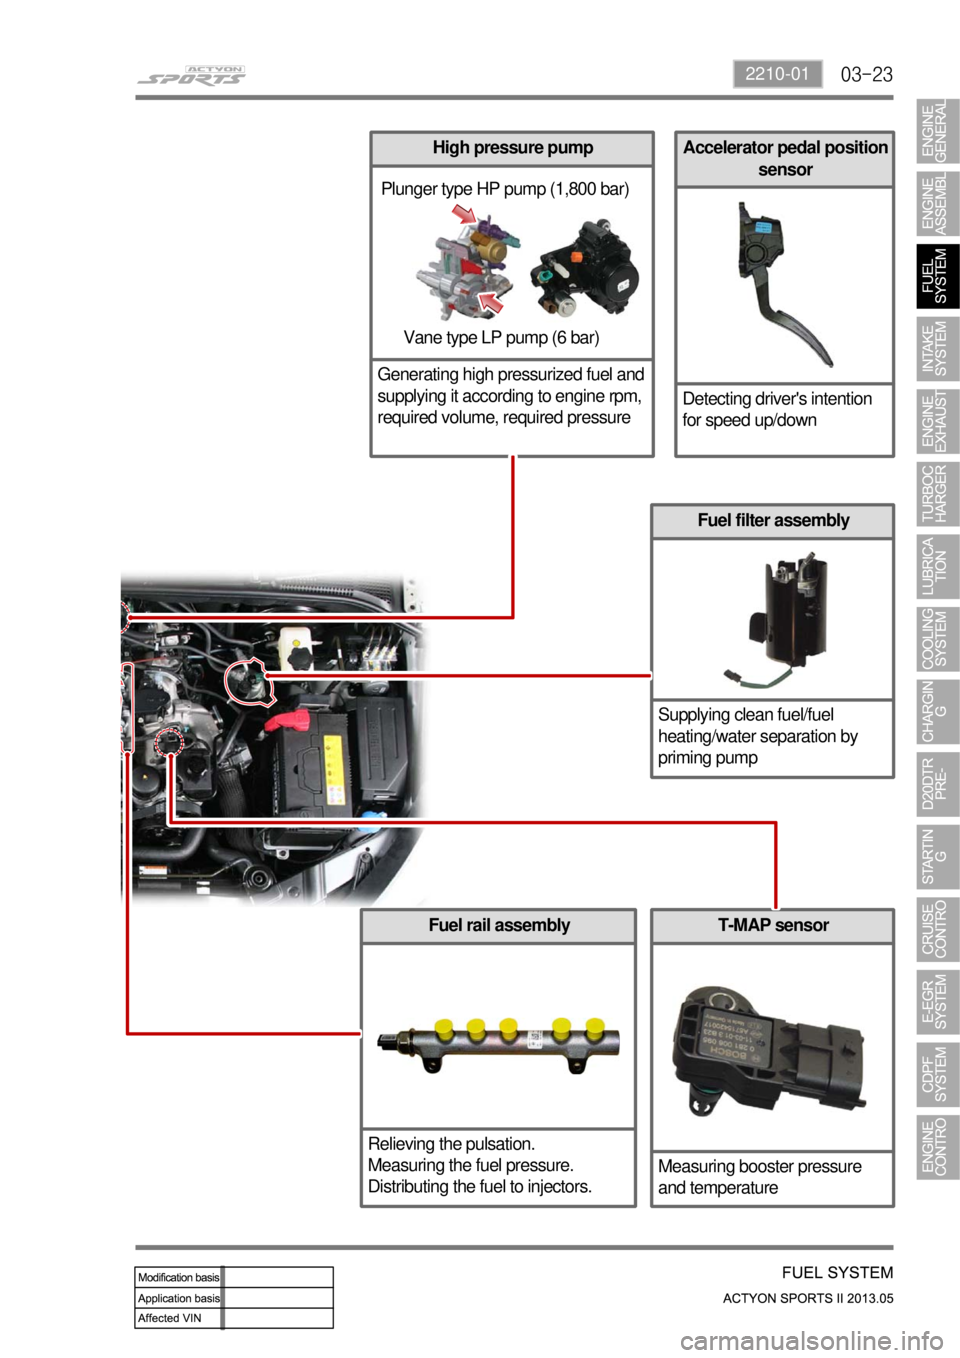 SSANGYONG NEW ACTYON SPORTS 2013  Service Manual 03-232210-01
Accelerator pedal position 
sensor
Detecting drivers intention 
for speed up/down
Fuel rail assembly
Relieving the pulsation.
Measuring the fuel pressure.
Distributing the fuel to inject